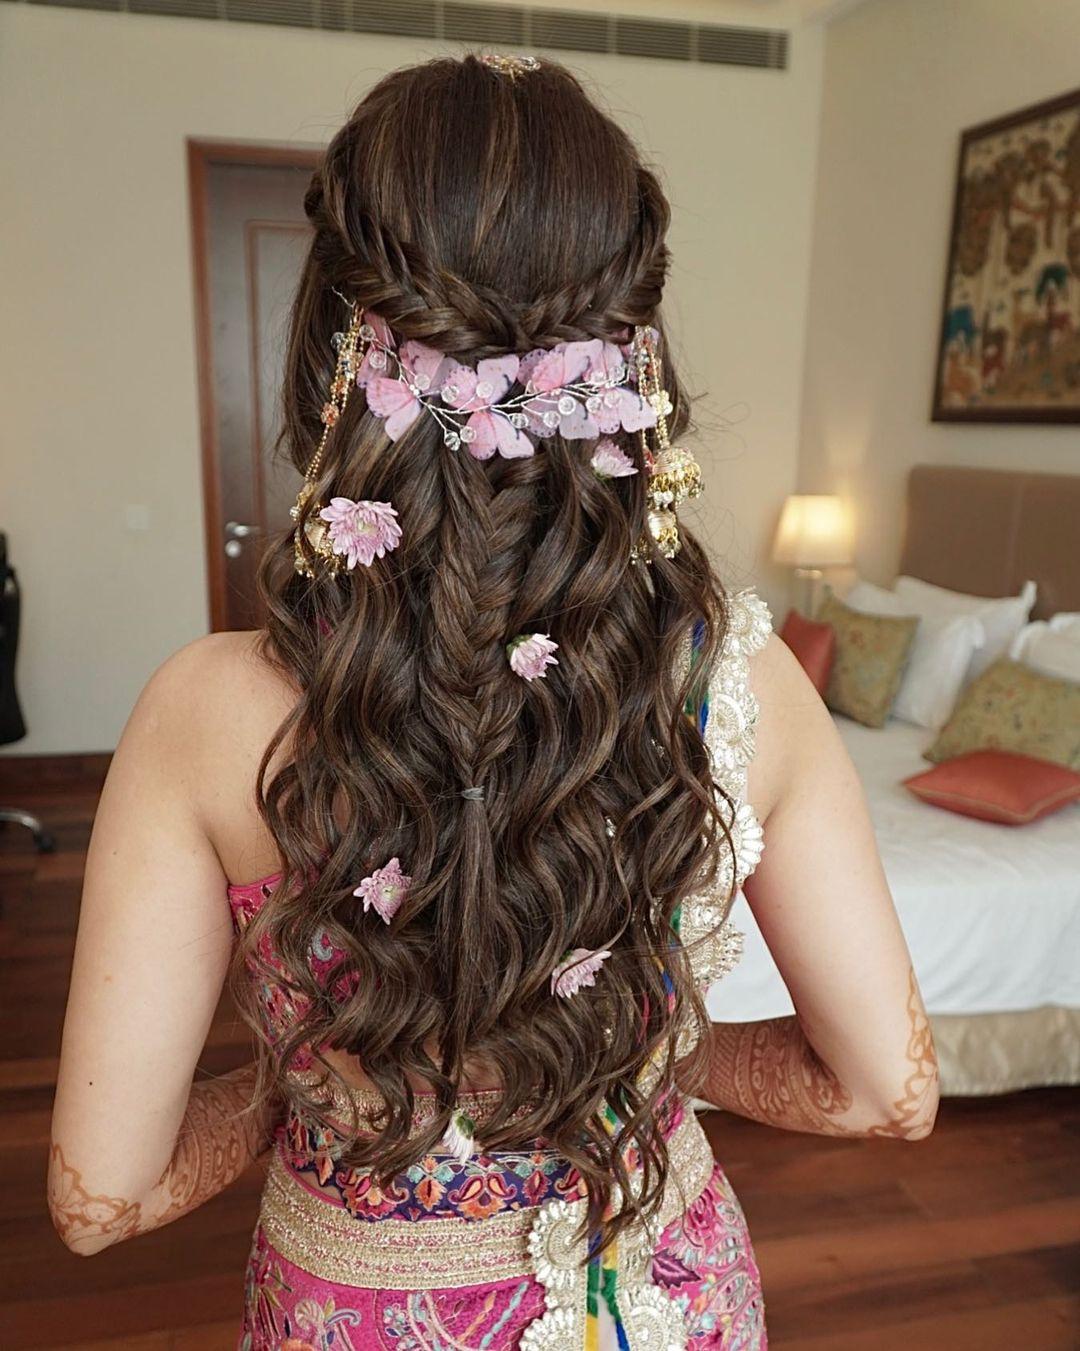 Pre-wedding hairstyles that are hit and classy